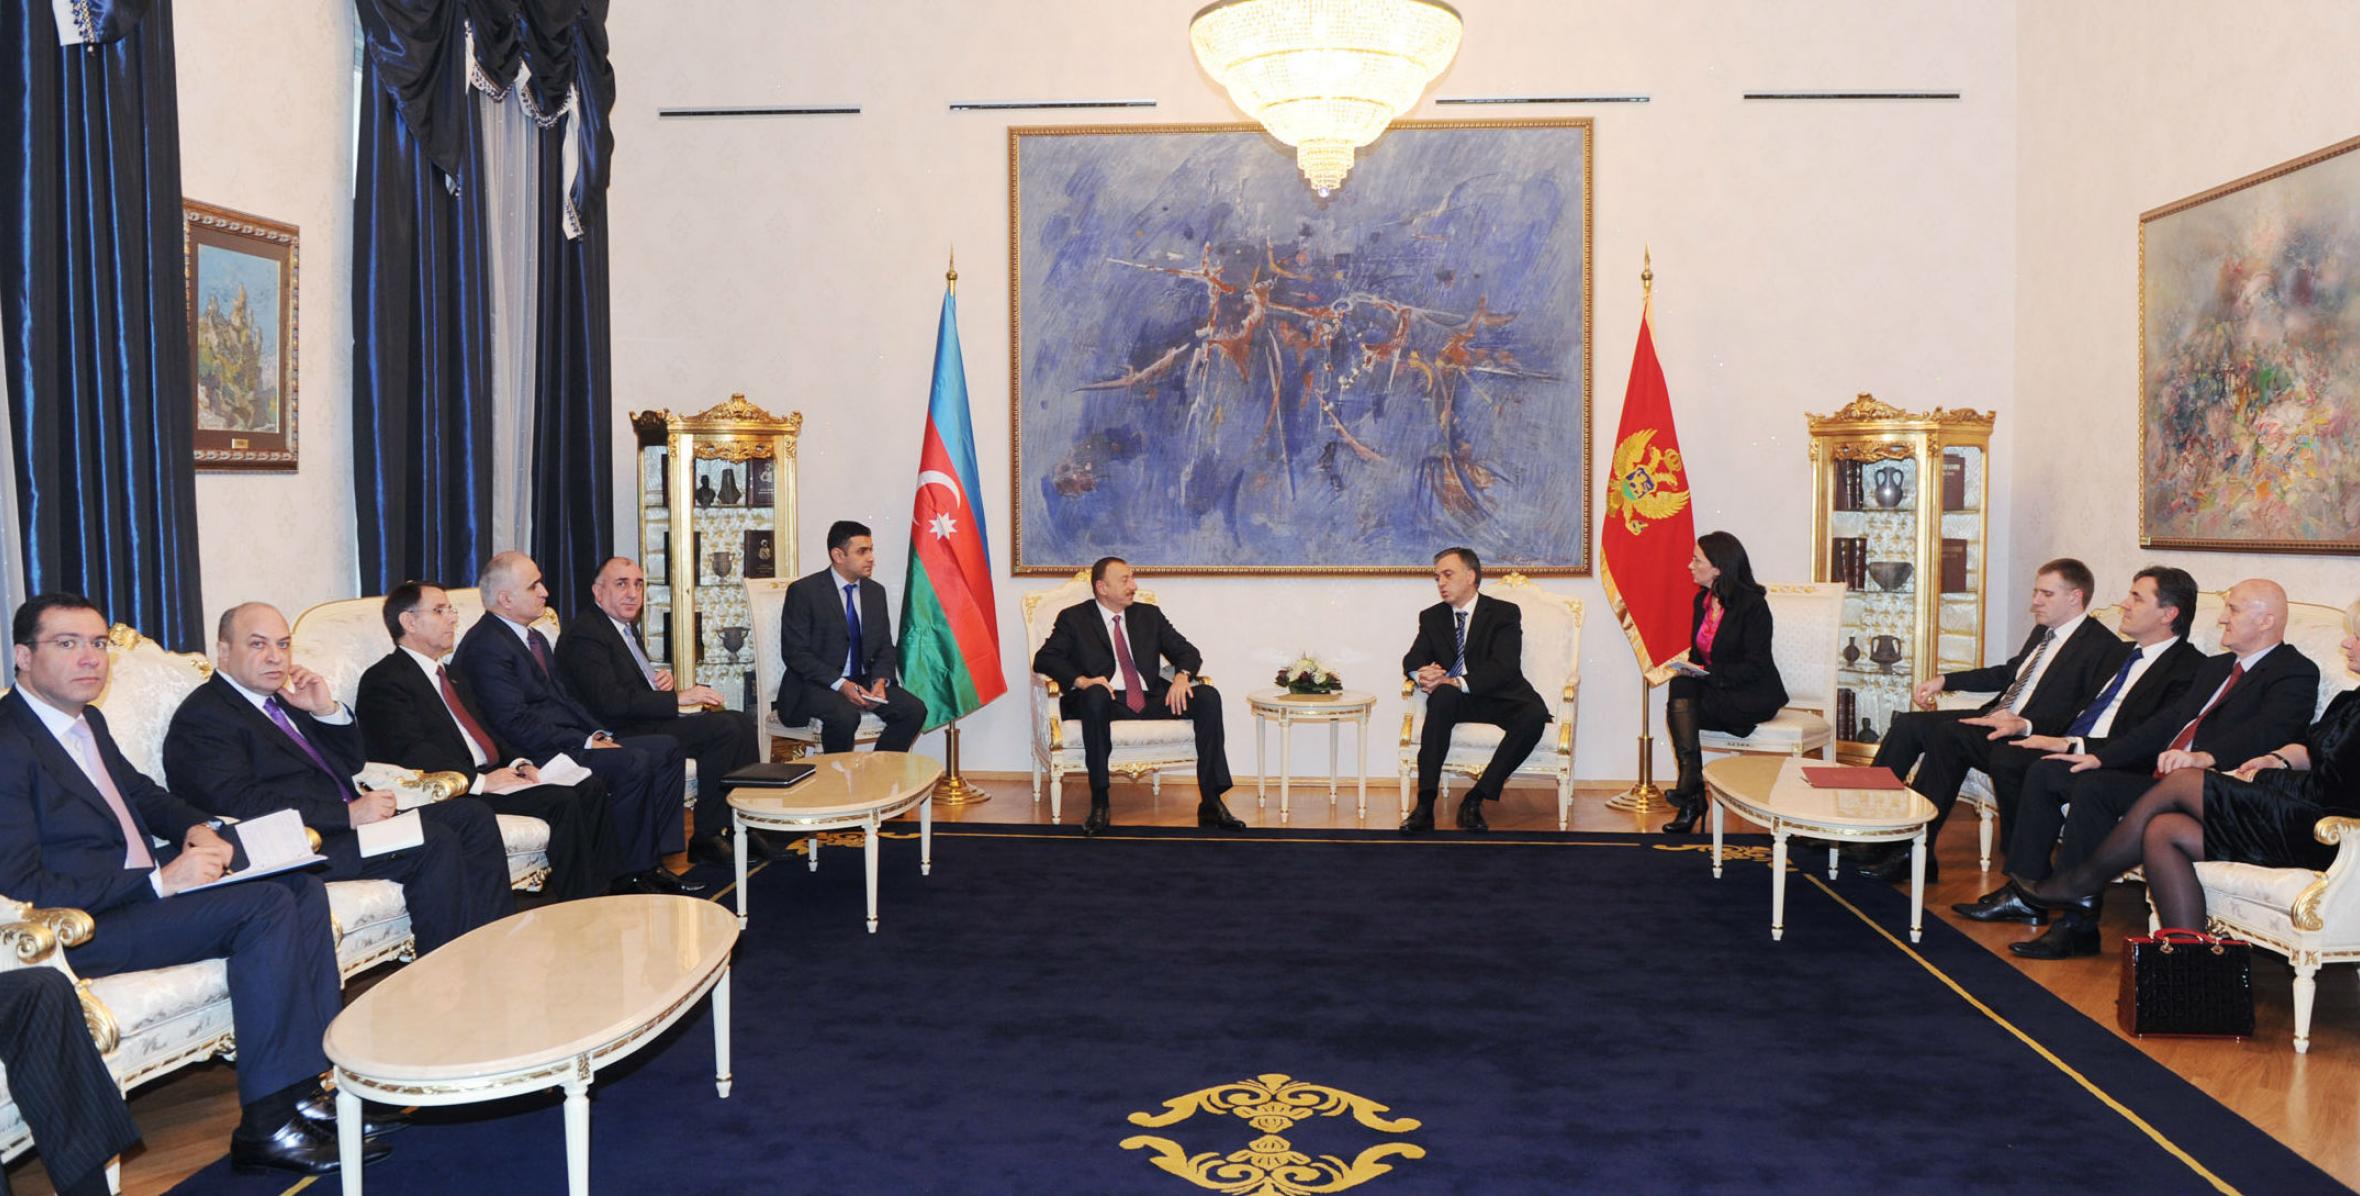 Presidents of Azerbaijan and Montenegro held a meeting in an expanded format